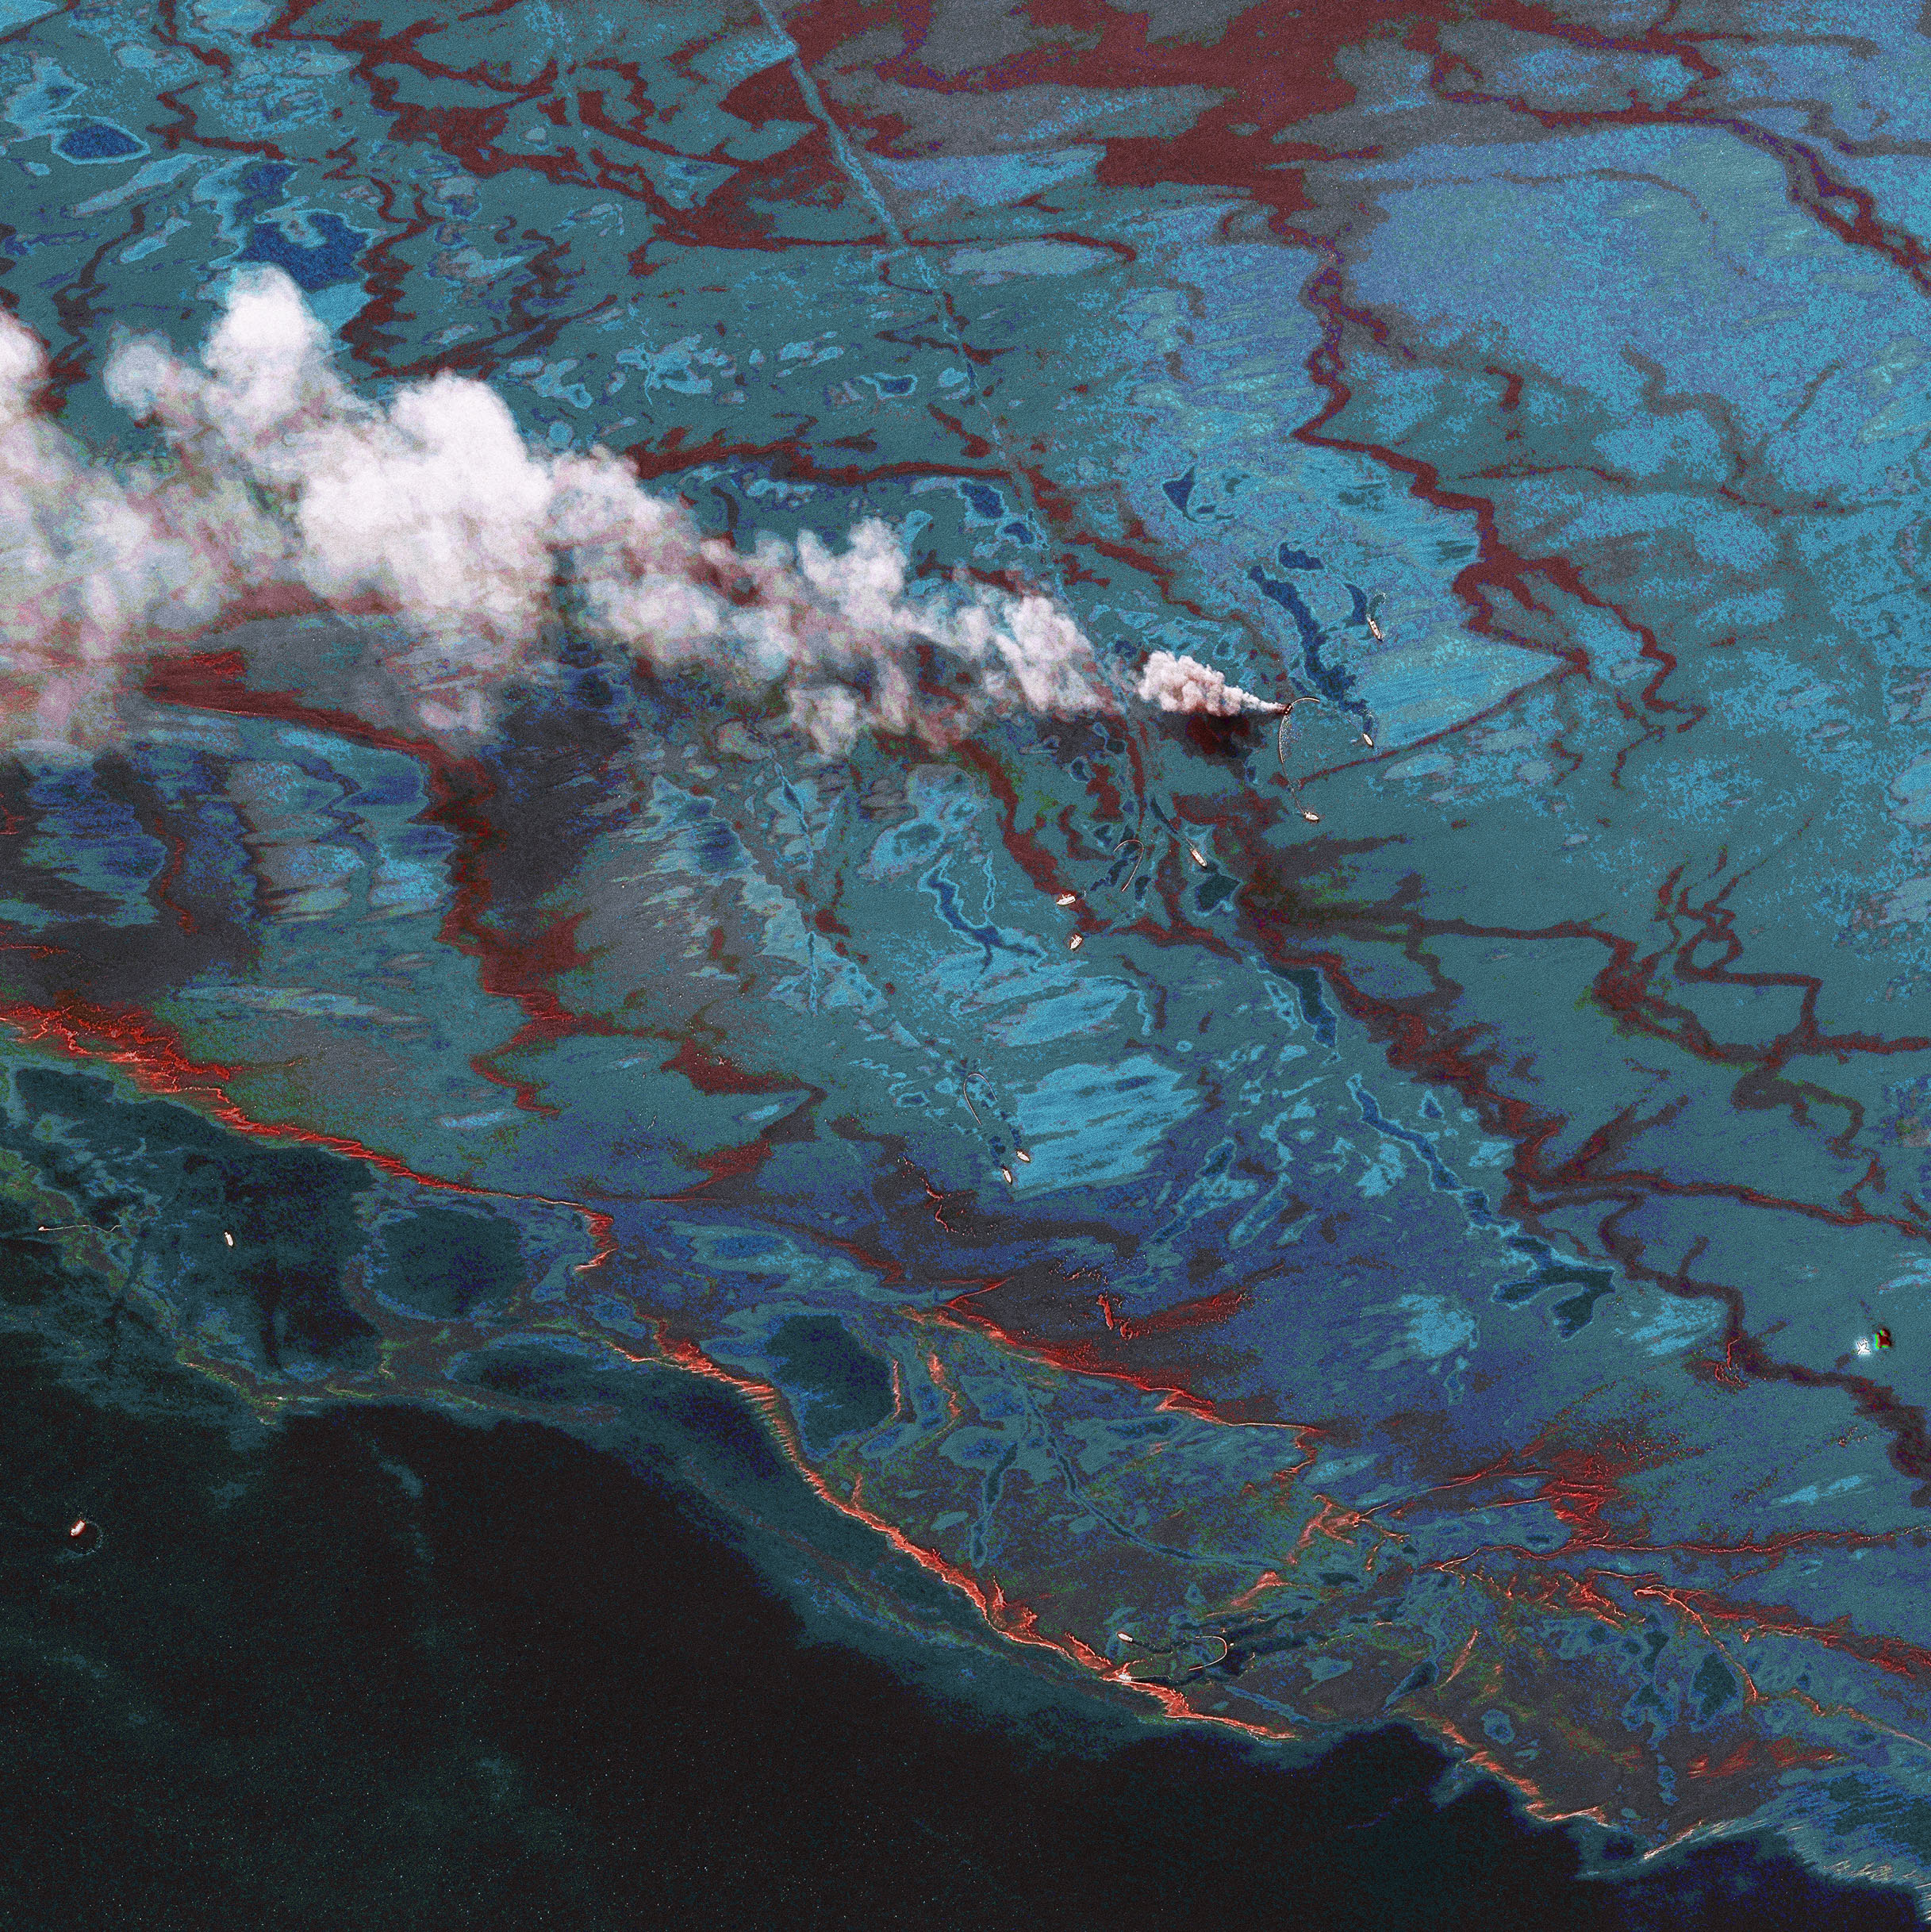 Oil Spill In The Gulf